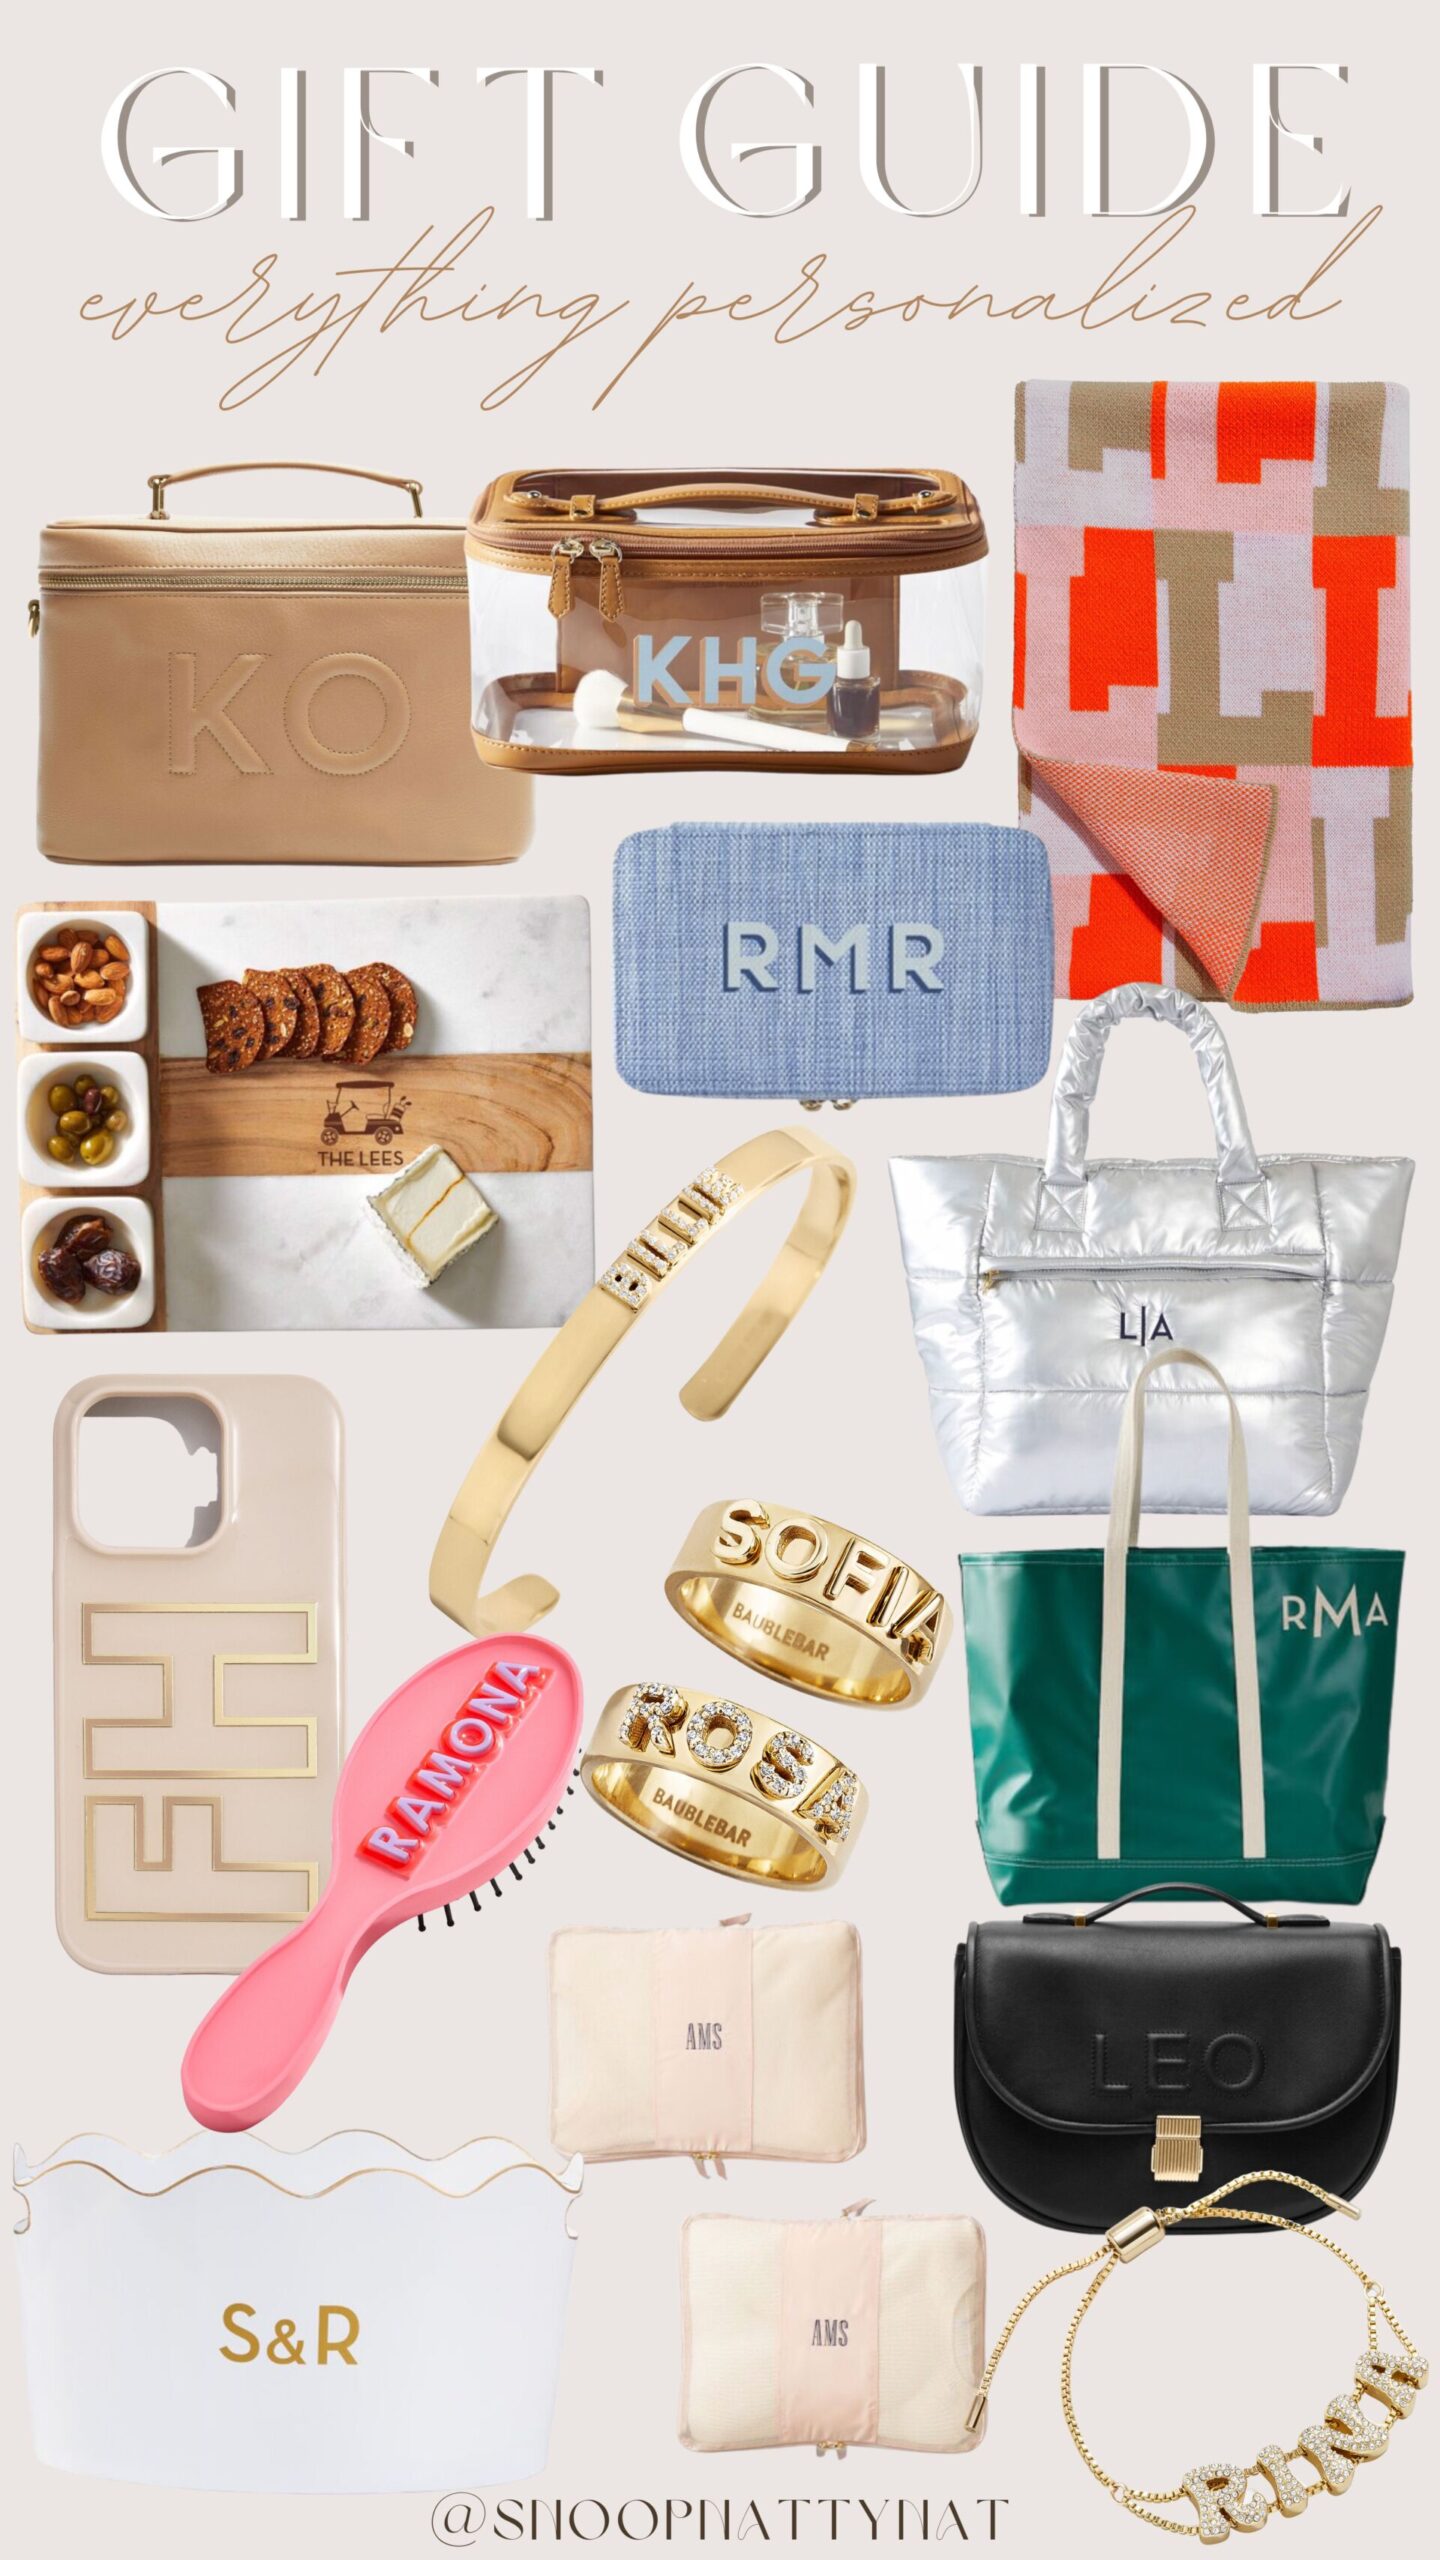 The BEST Personalized Gift Ideas for Her!